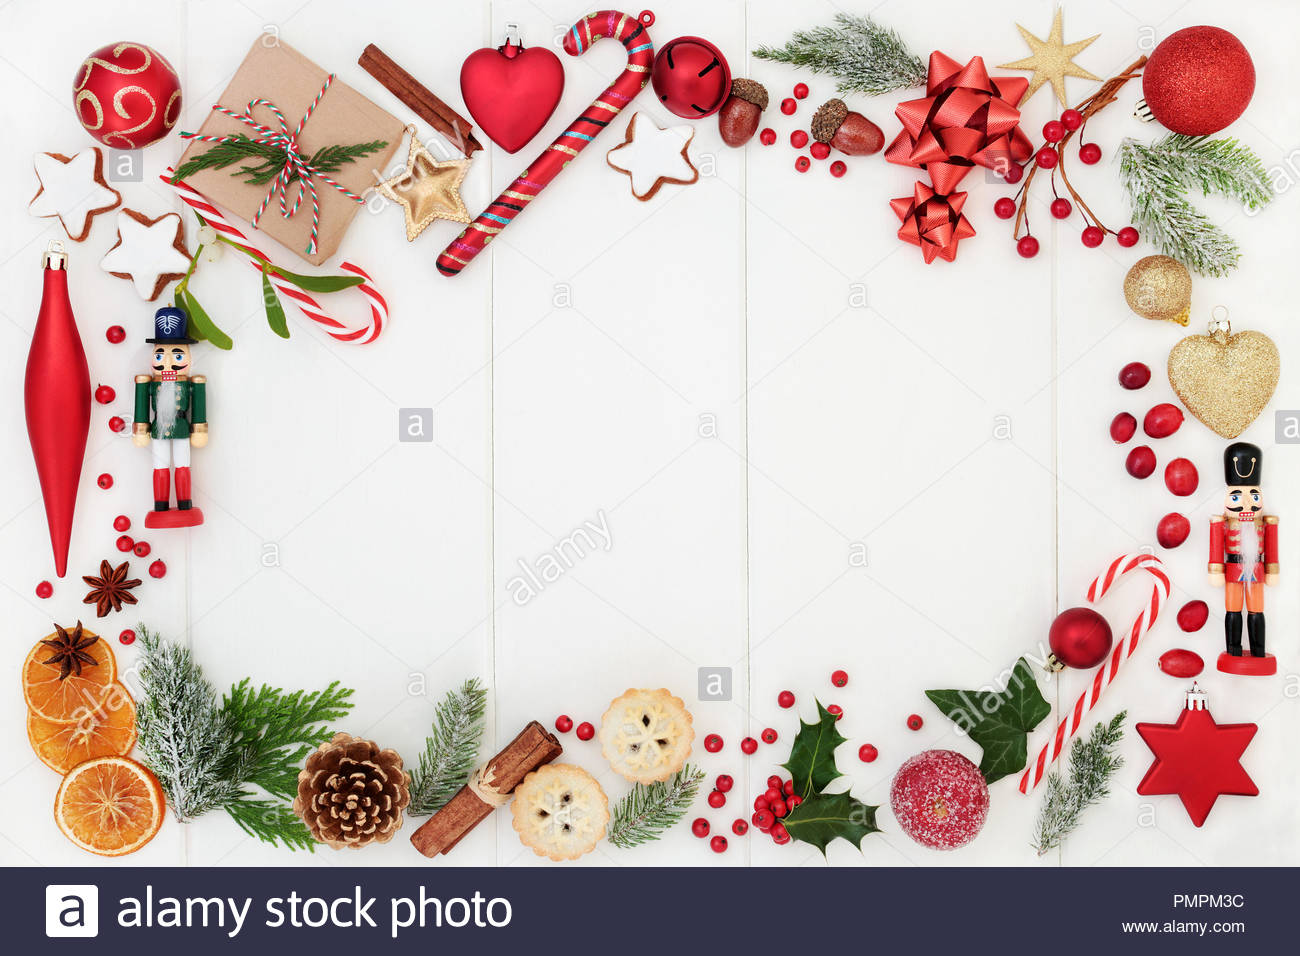 Christmas background border composition with traditional symbols